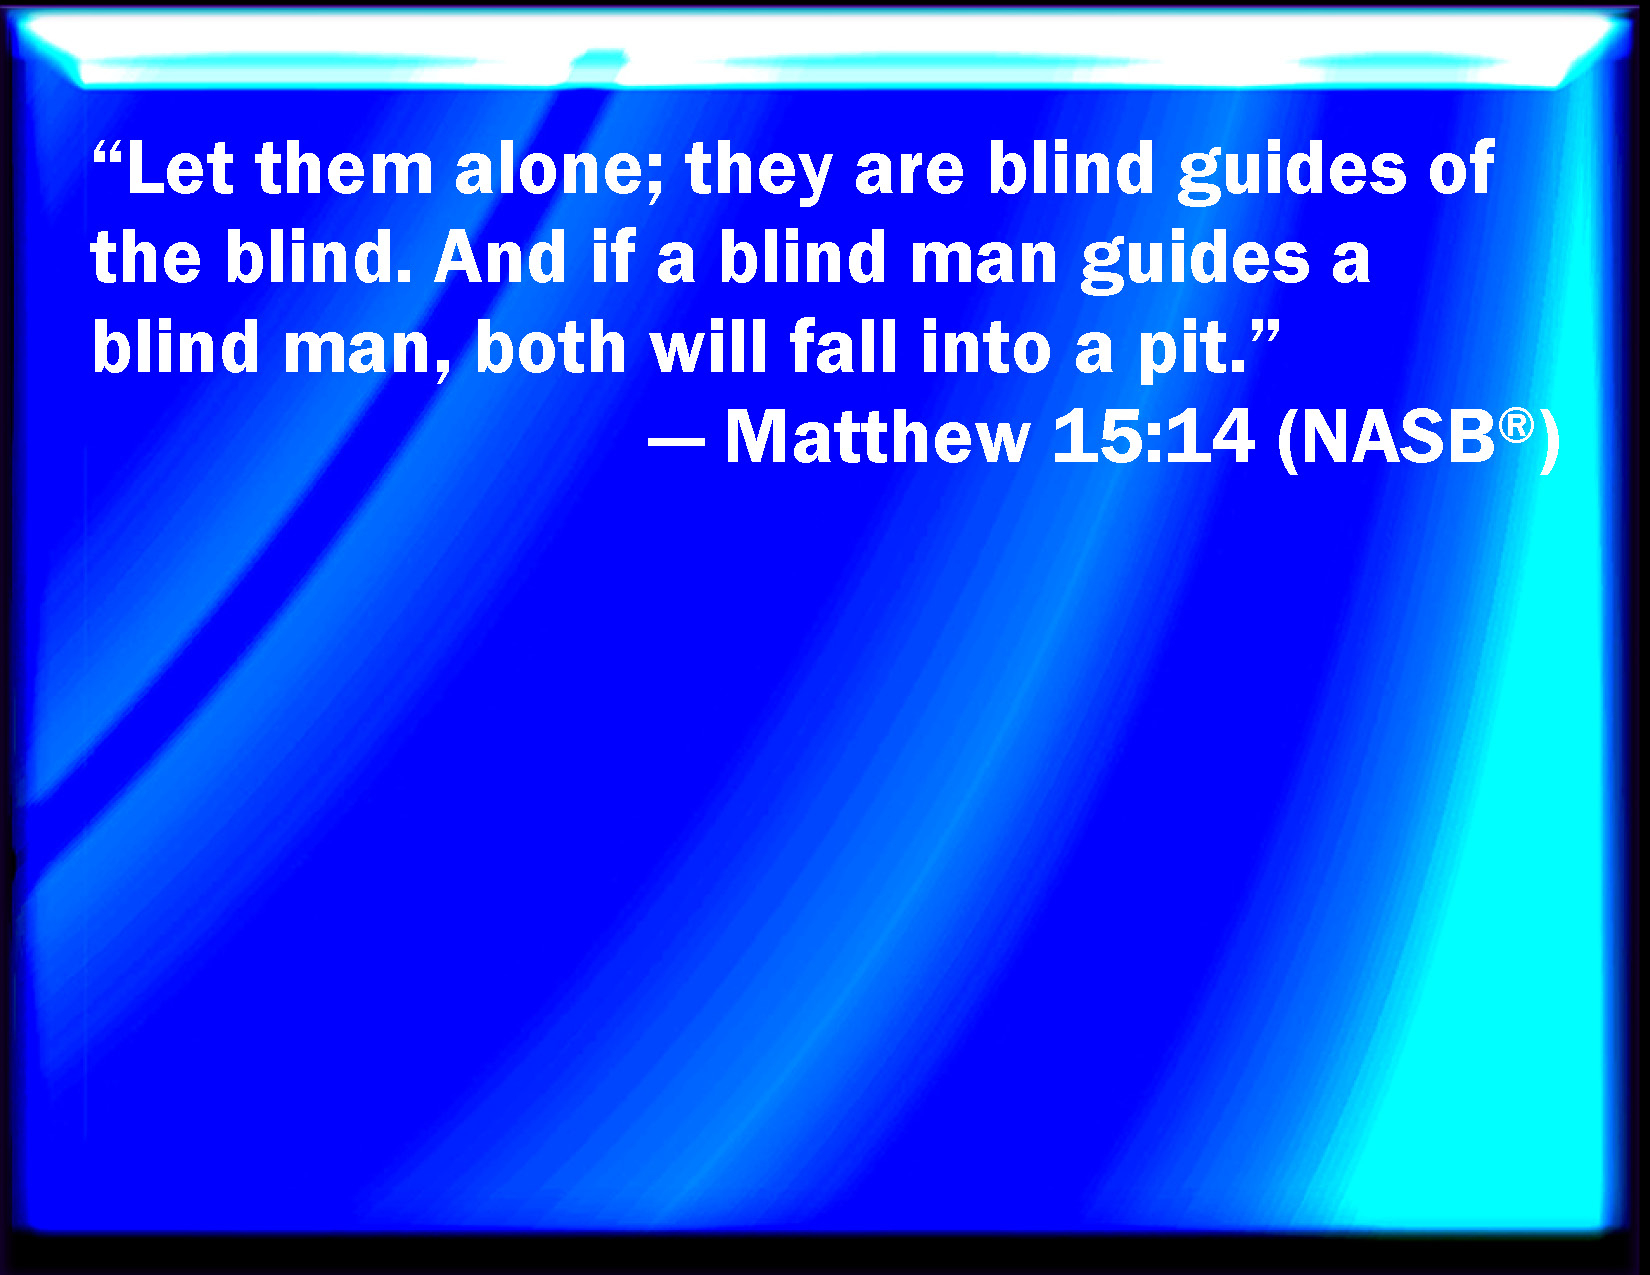 Matthew 1514 Let Them Alone They Be Blind Leaders Of The Blind And